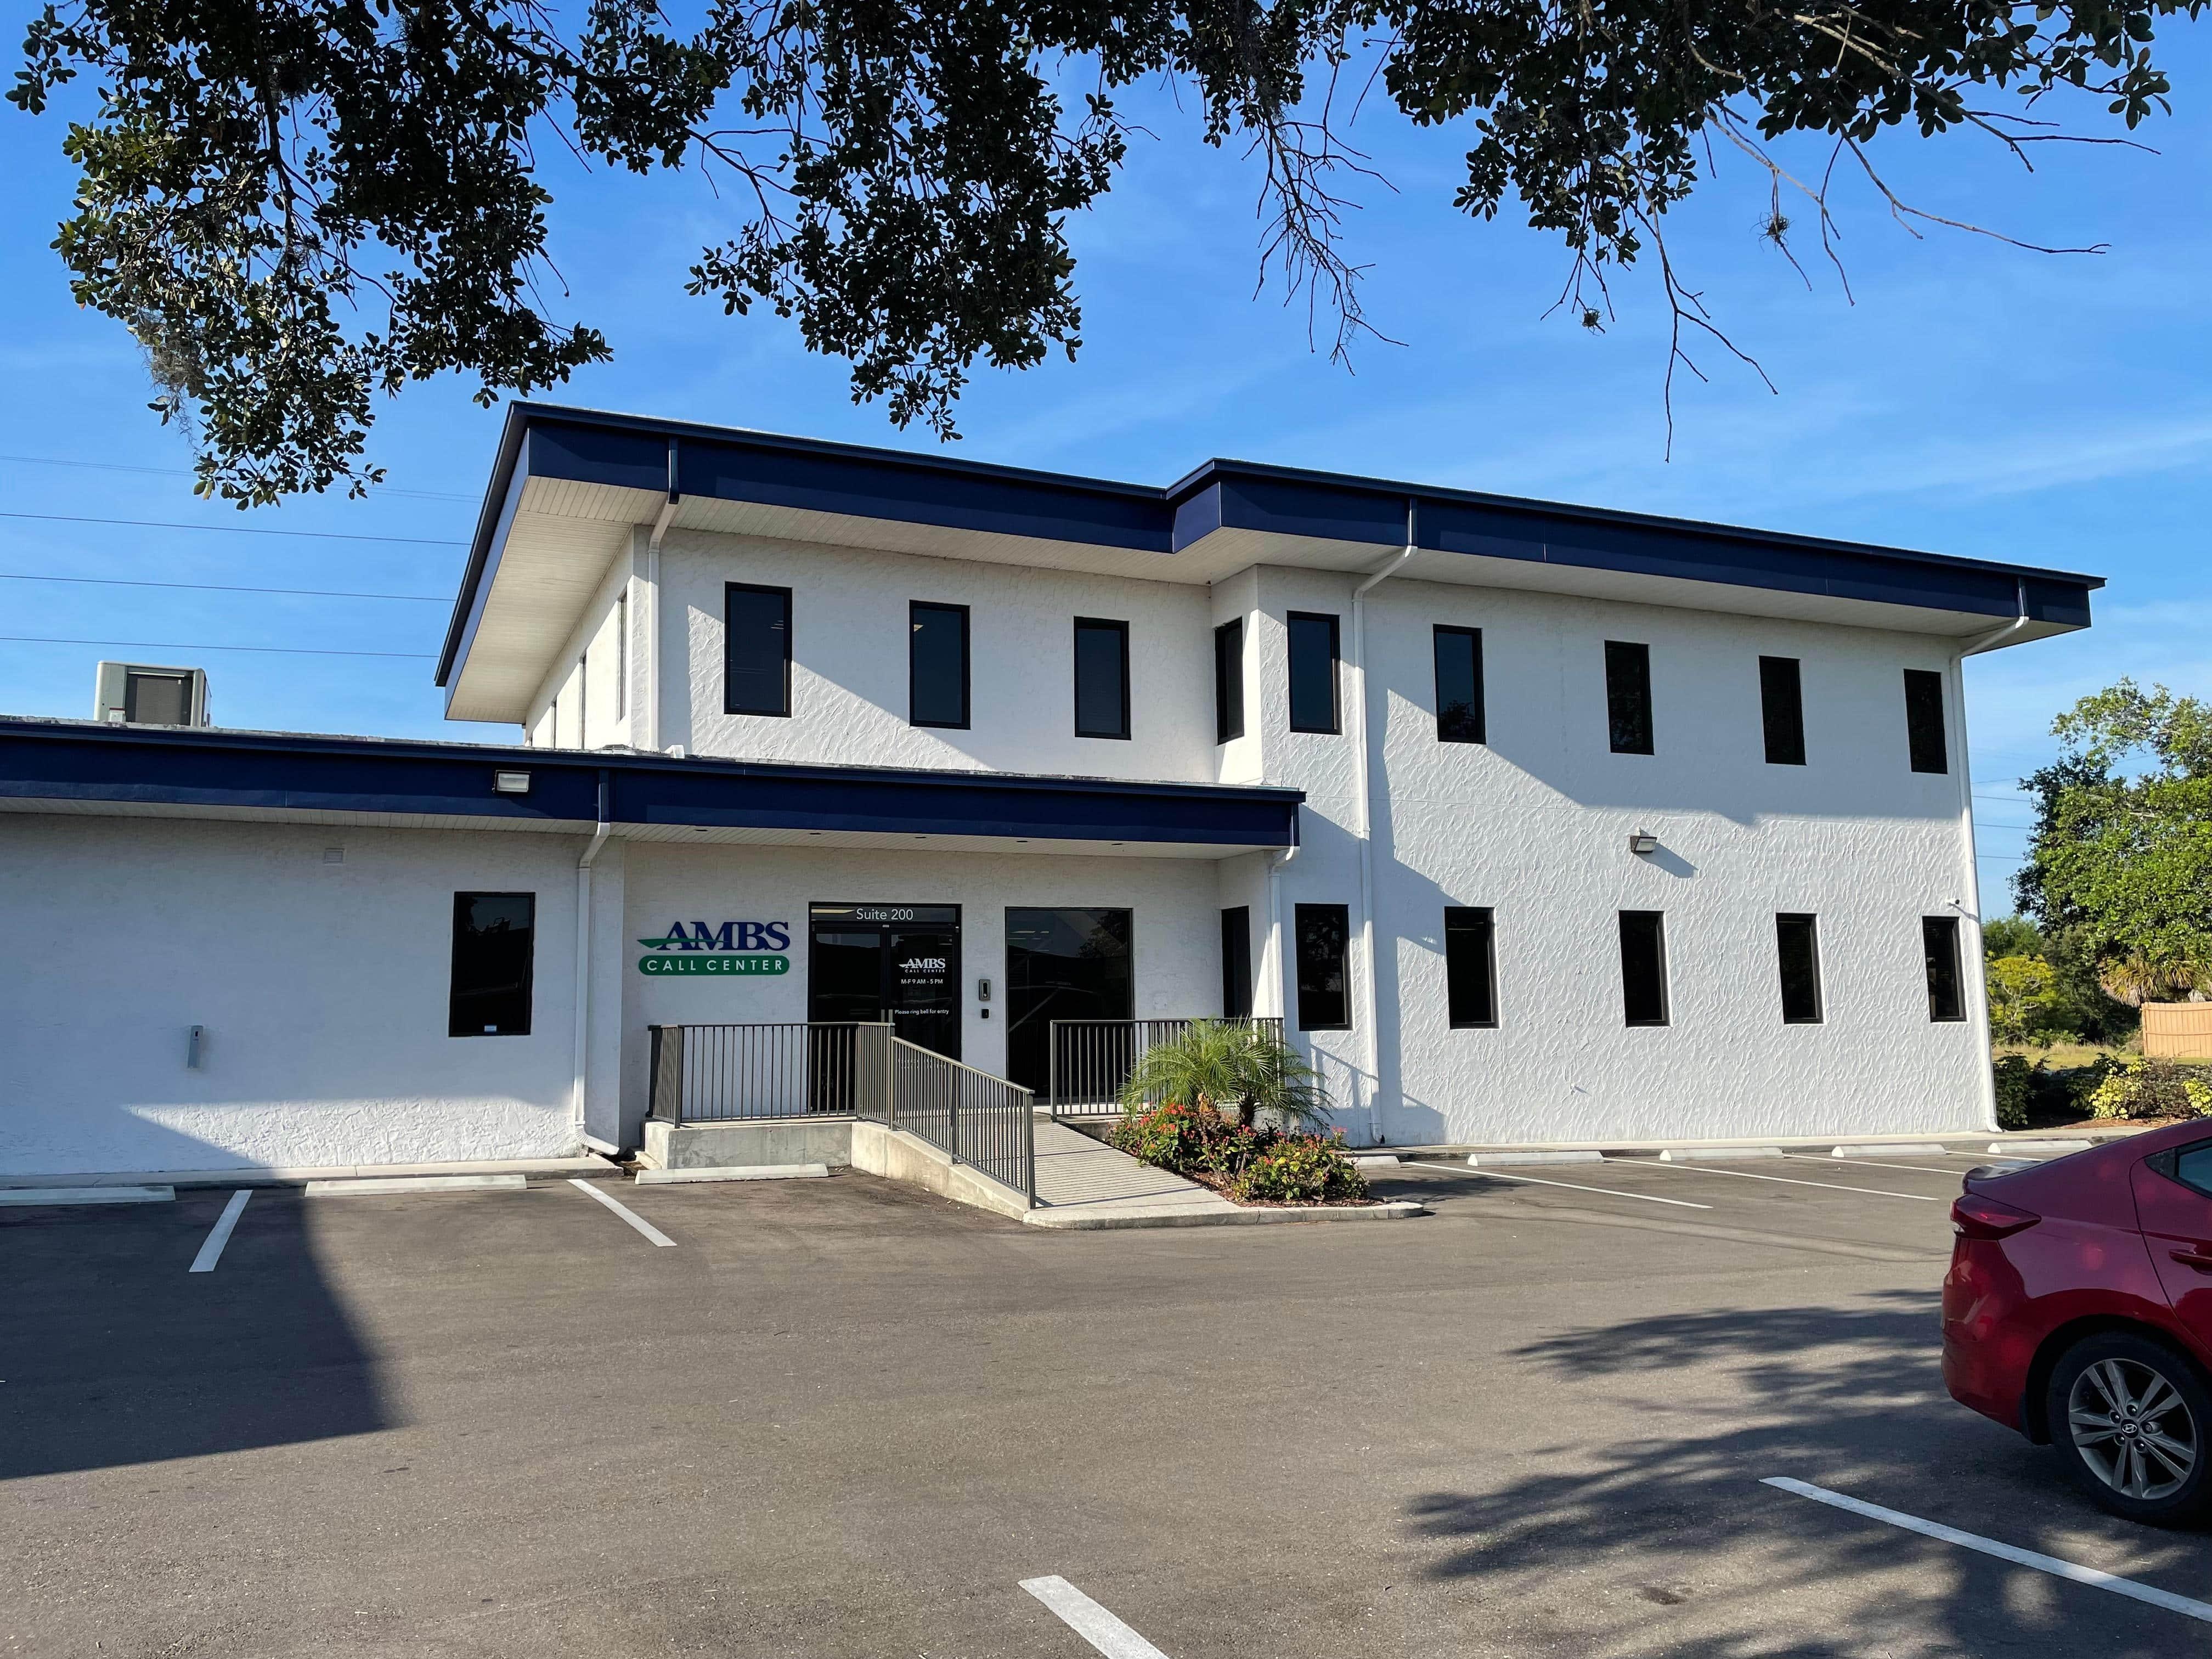 Ambs Call Center's Tampa Location